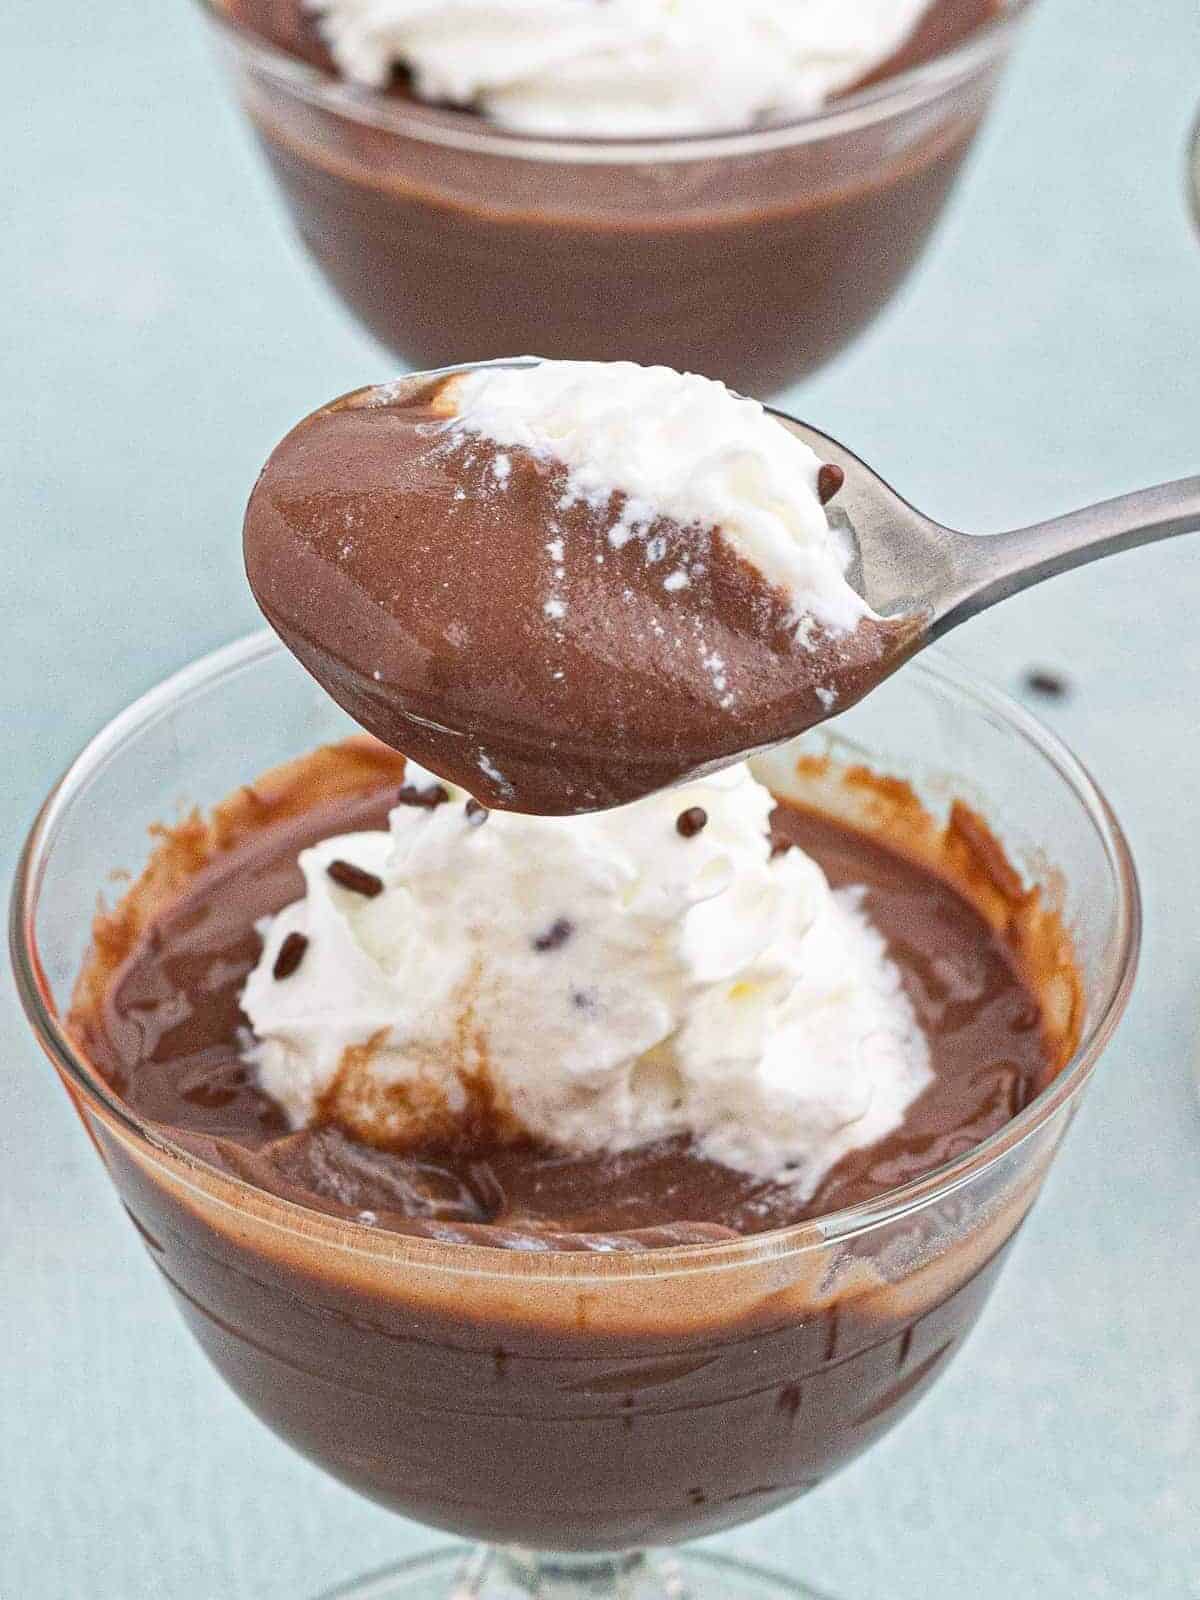 spoonful of chocolate pudding